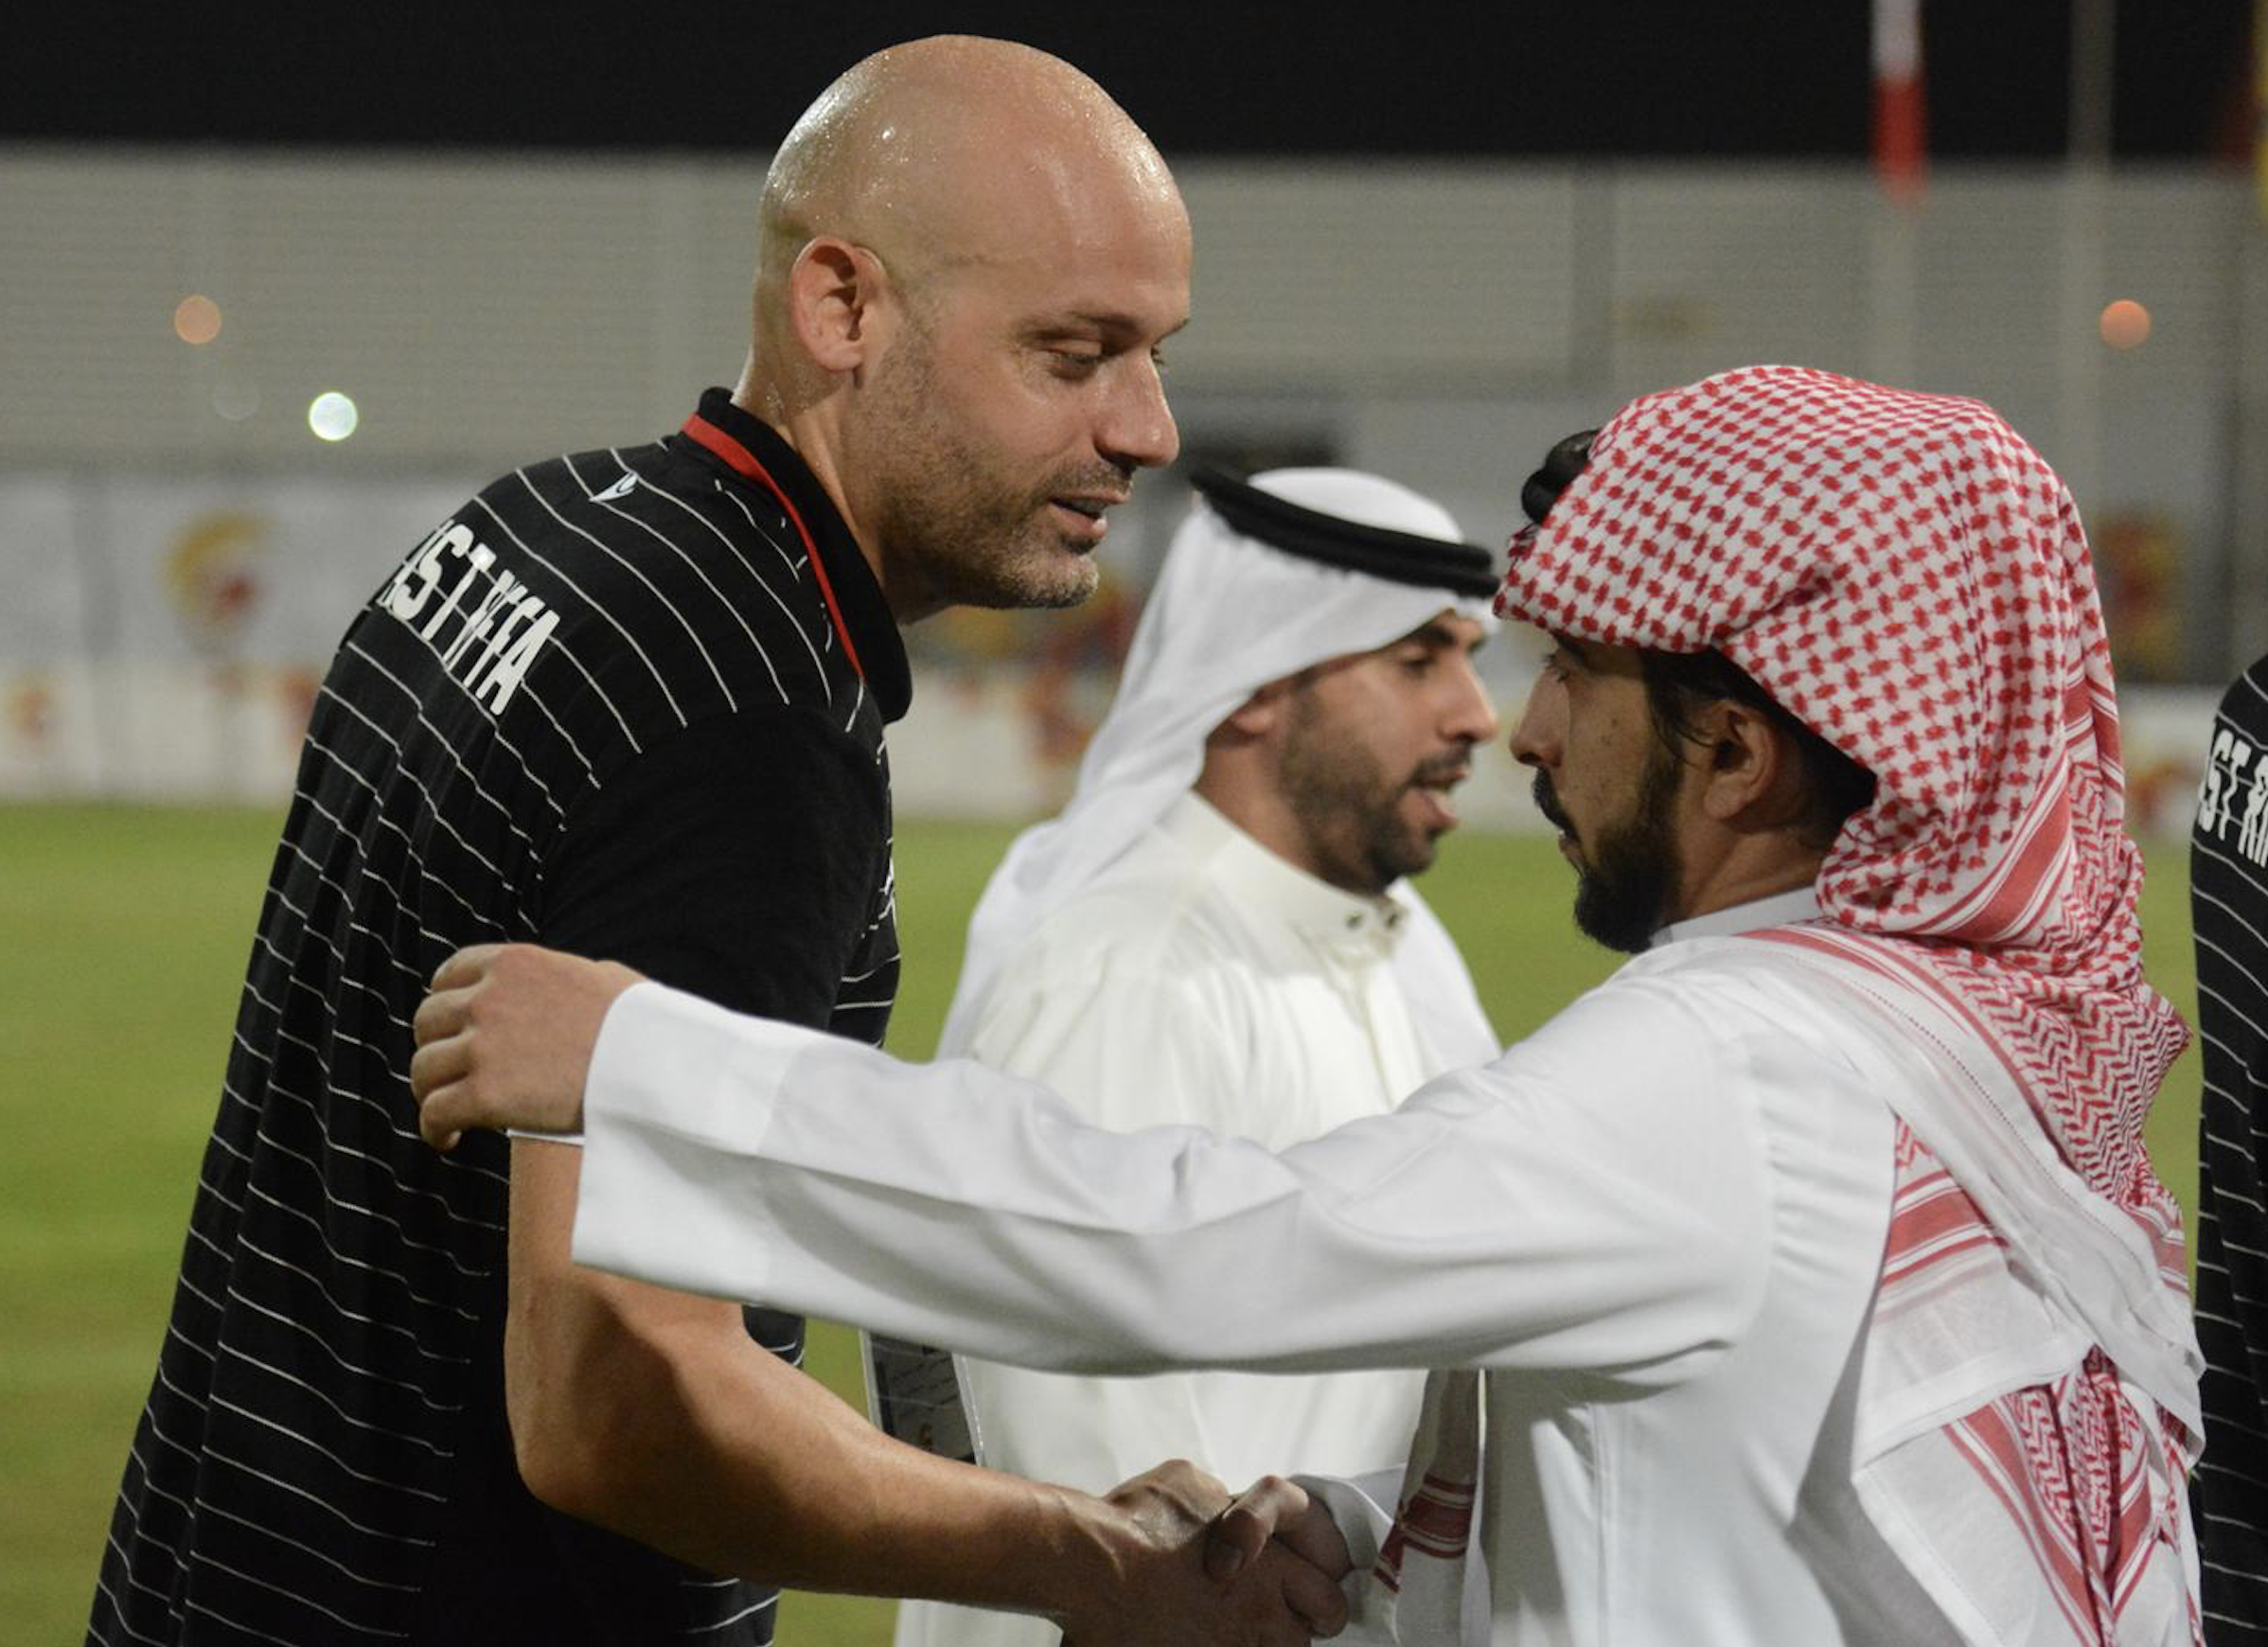 Pedro Gómez Carmona tells readers of his MARCA blog all about life in Bahrain